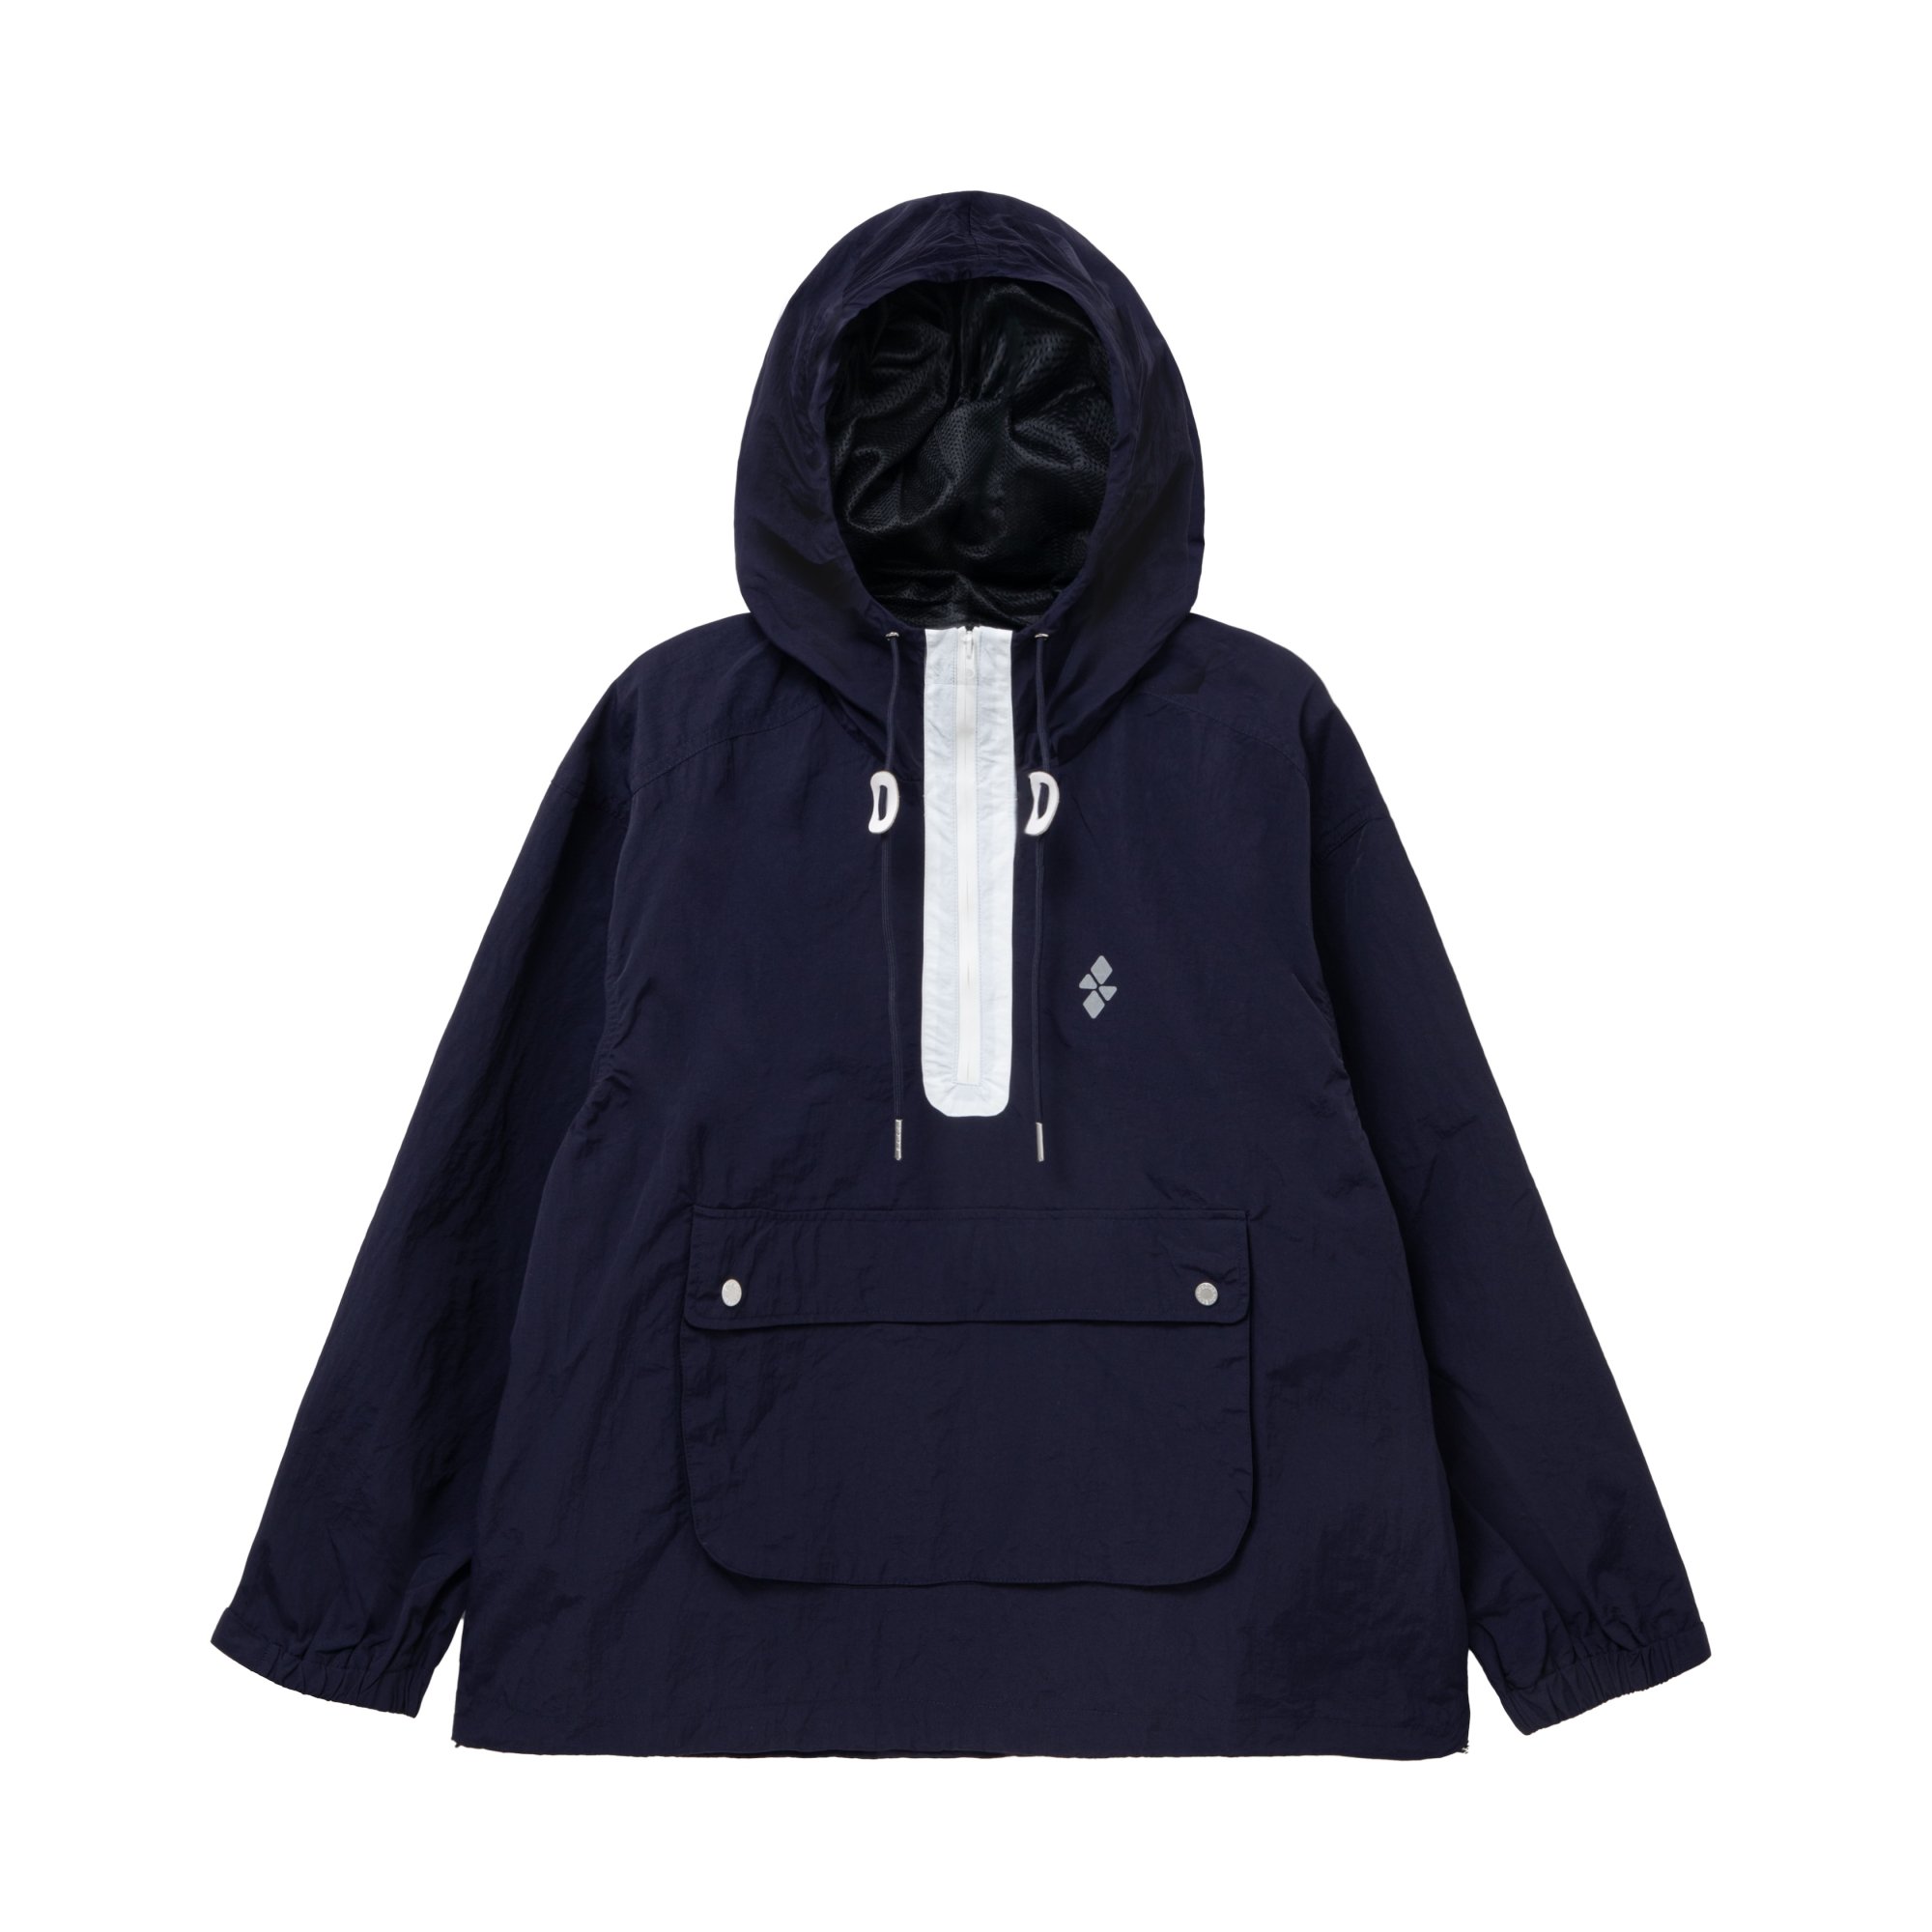 SPECIAL GUEST<br>SG Anorak Jacket<br>